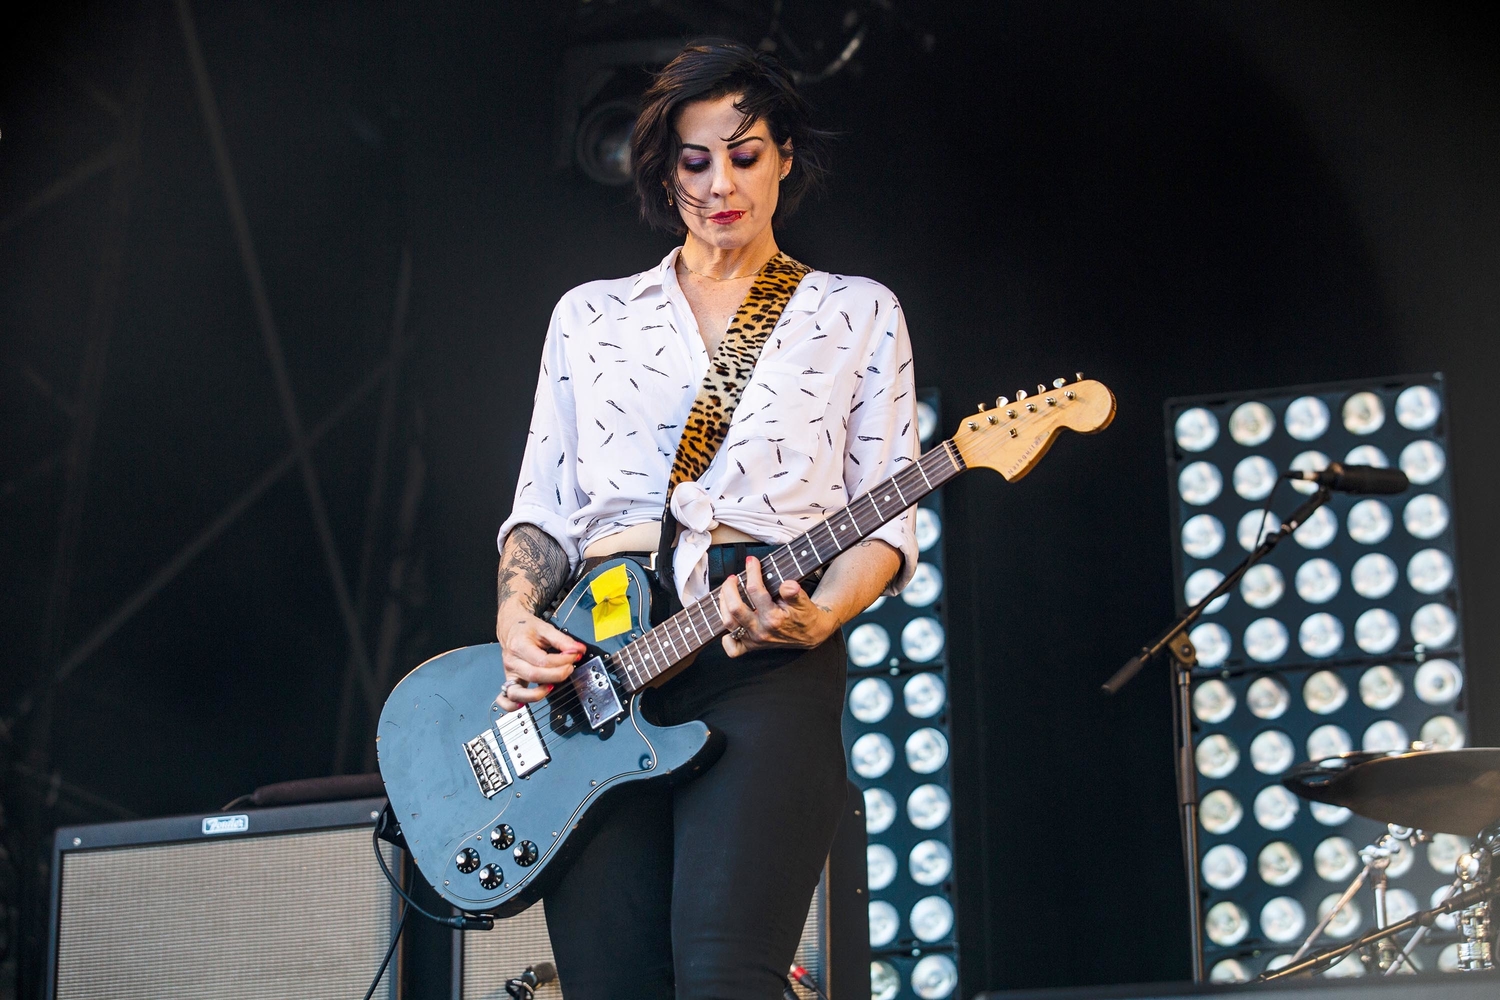 The Distillers share first new song in 15 years - hear 'Man vs Magnet'